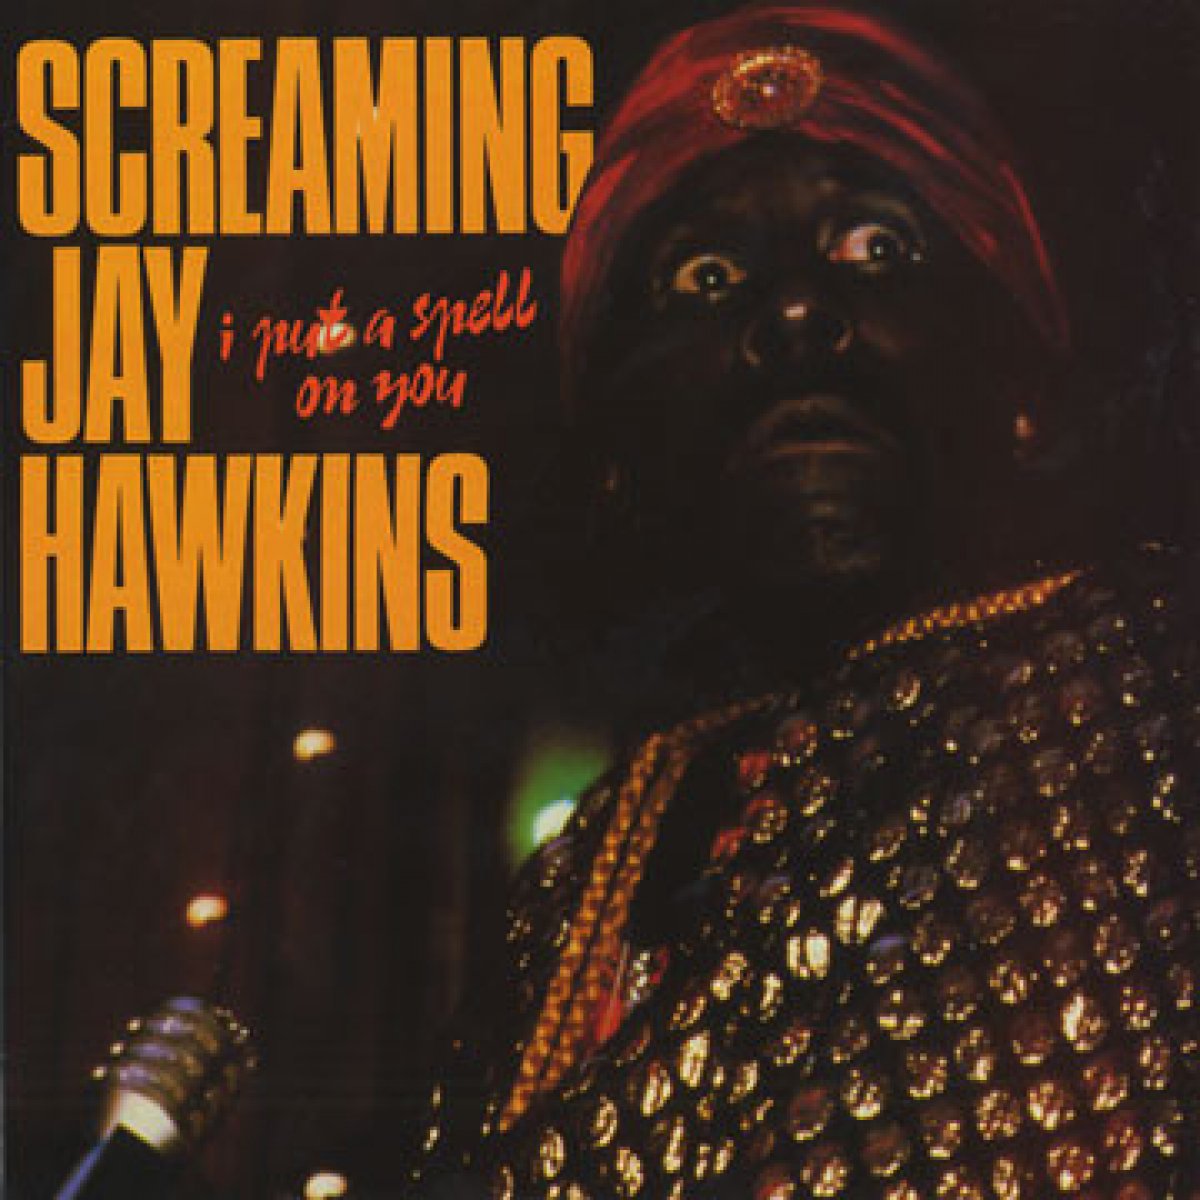 Screaming Jay Hawkins "I Put A Spell On You"